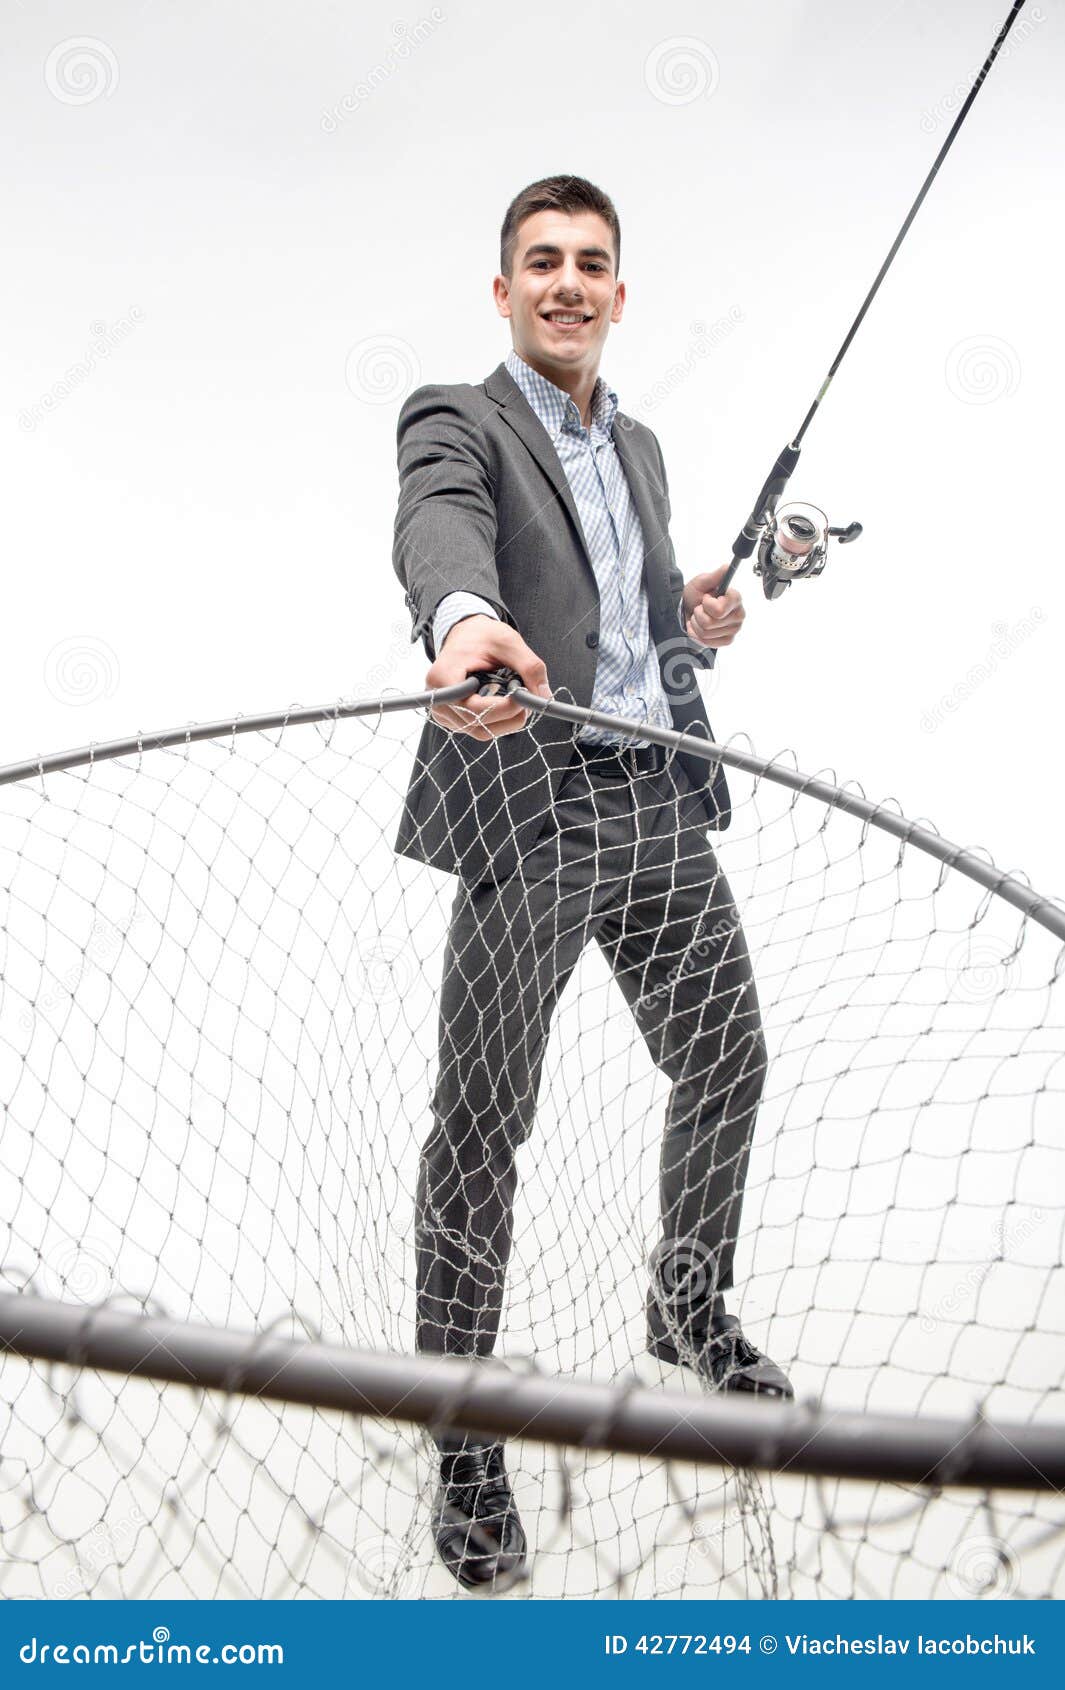 Man and net stock photo. Image of relaxed, expression - 42772494